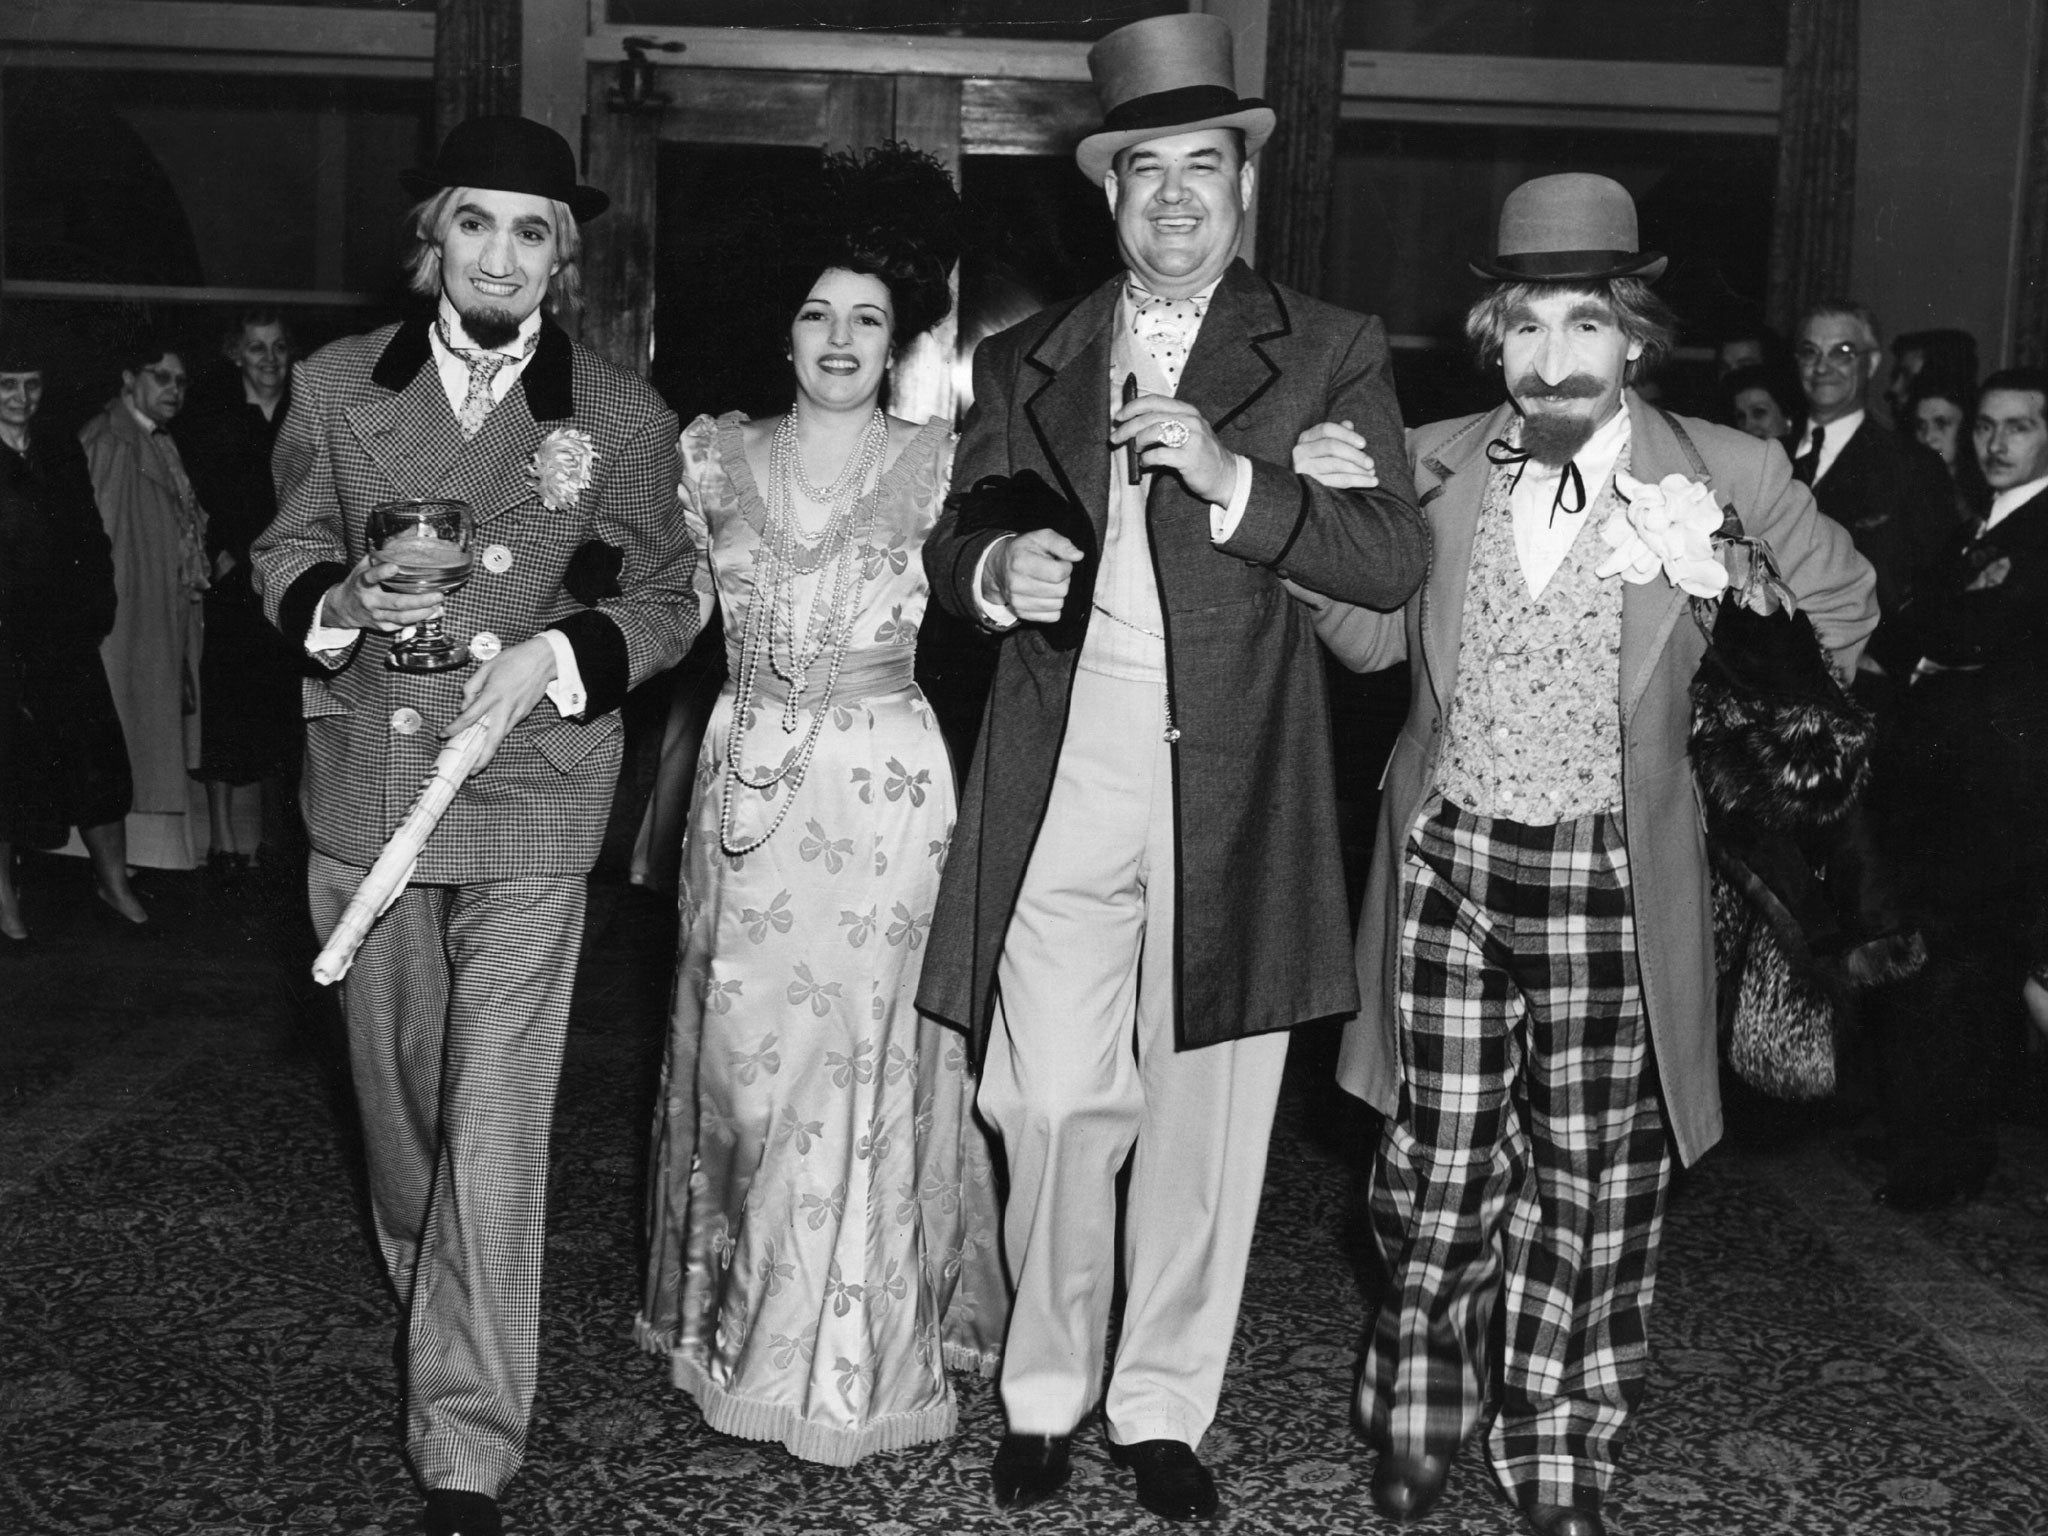 Tyrone Power, the American film actor with Julie Carter, Don Wilson and Jimmie Star in fancy dress at Edgar Bergen's party, held at the Beverly Hills Hotel.